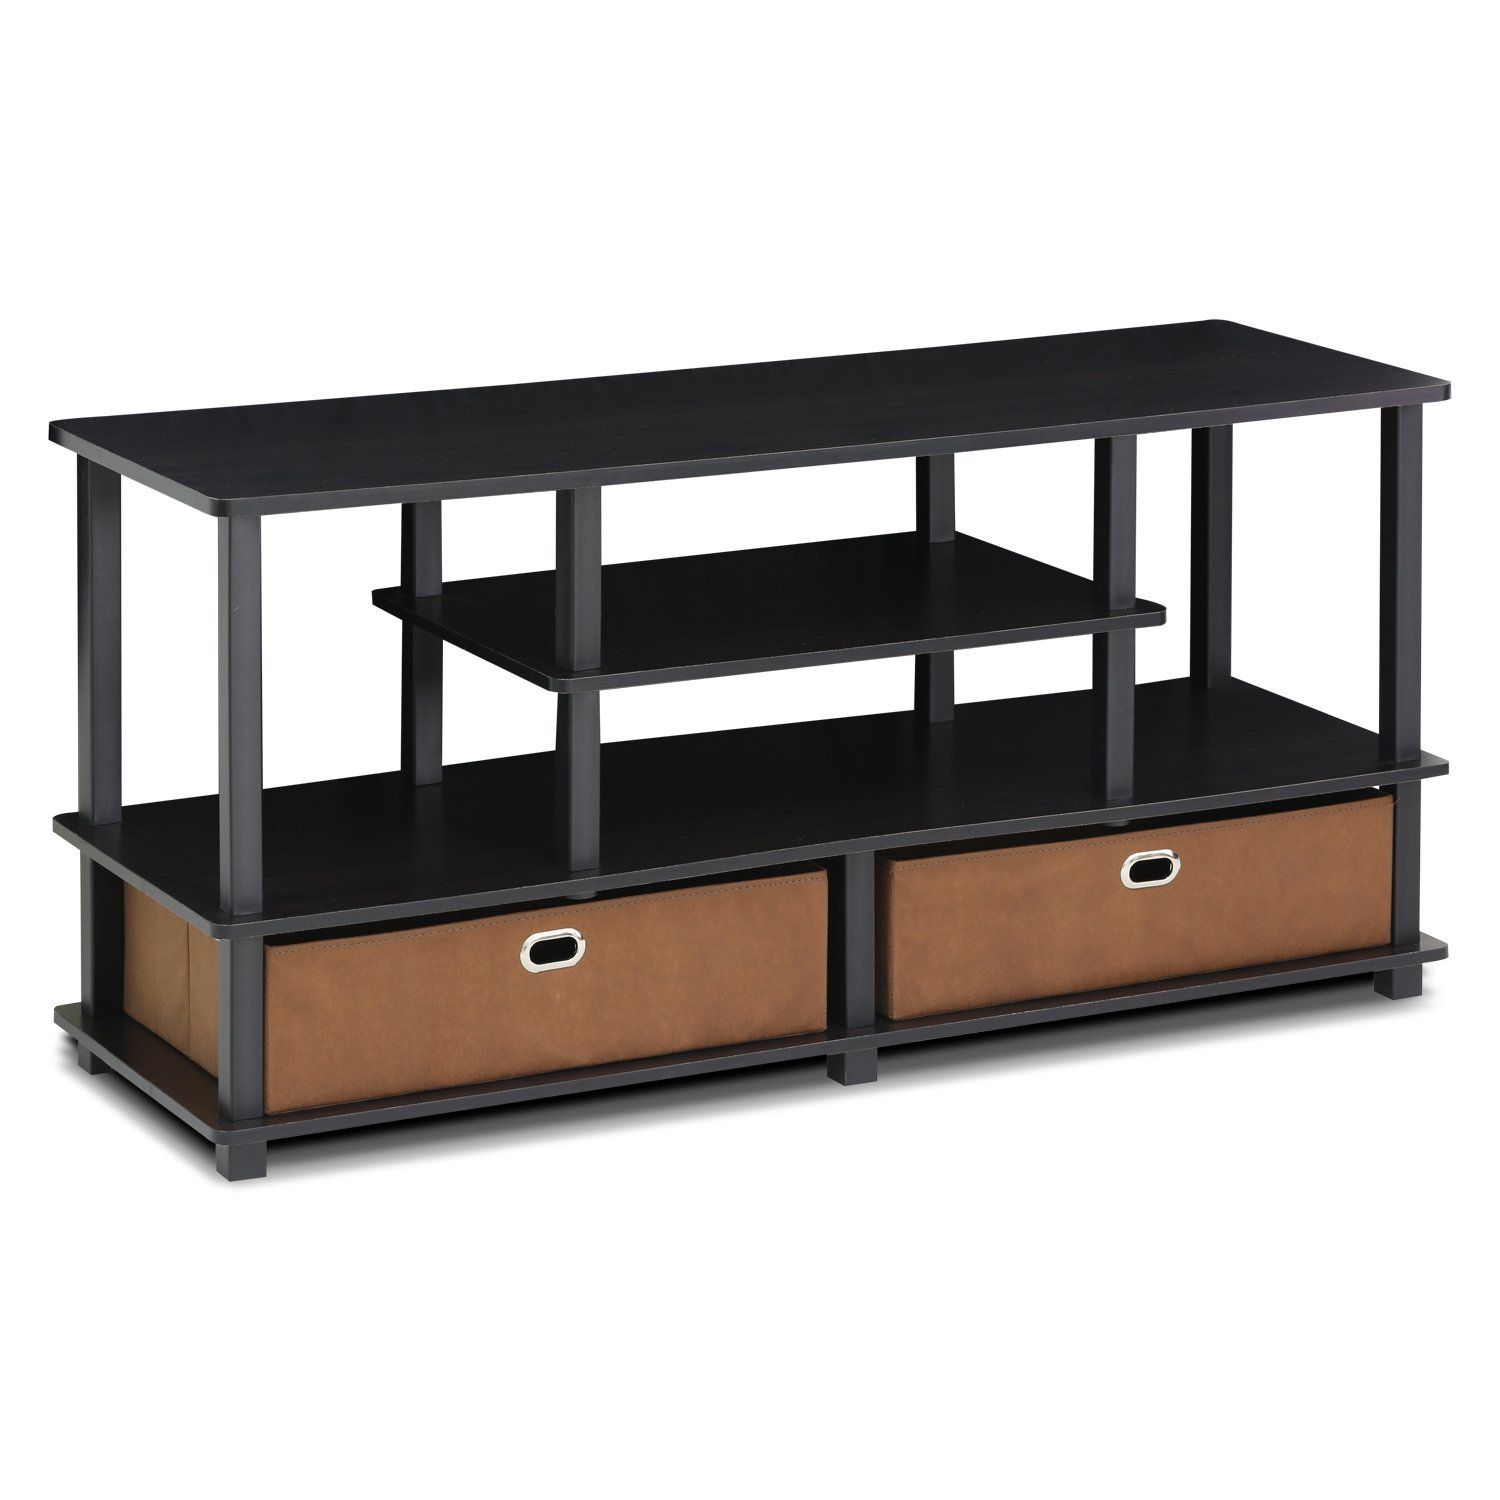 Furinno 15119exbkbr Jaya, Large Tv Stand For Up To 50 Inch Pertaining To Furinno Jaya Large Entertainment Center Tv Stands (View 2 of 15)